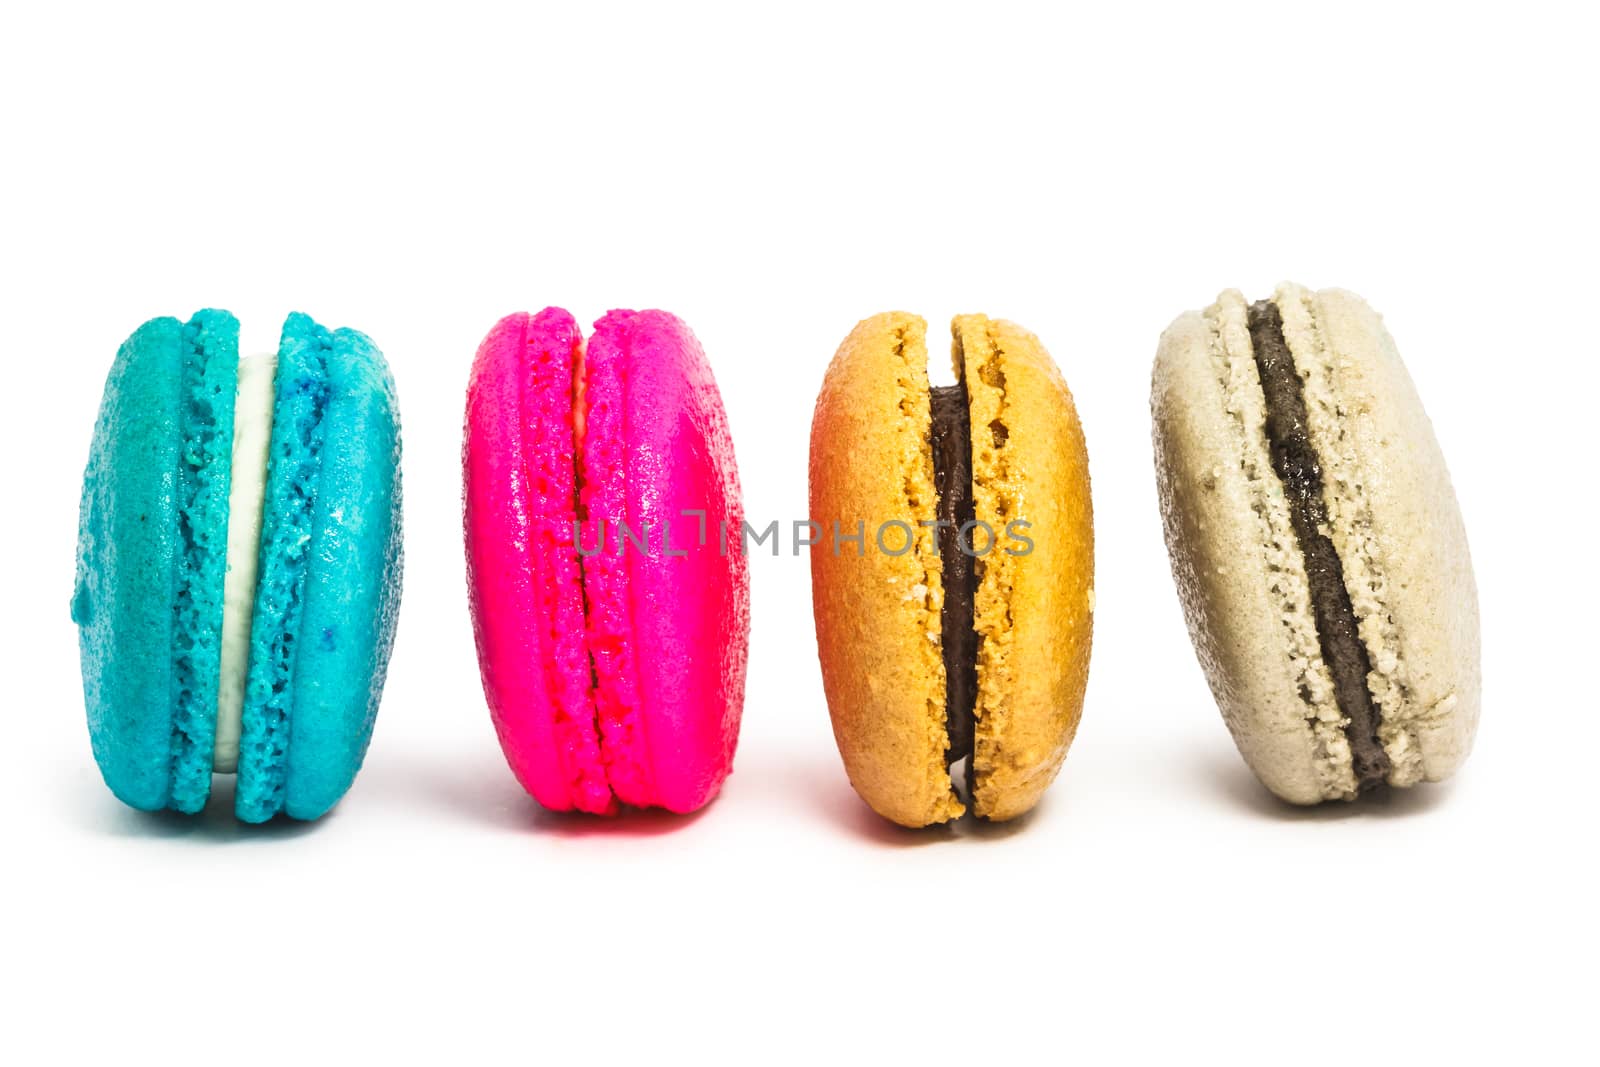 Colorful french macaroons on white background